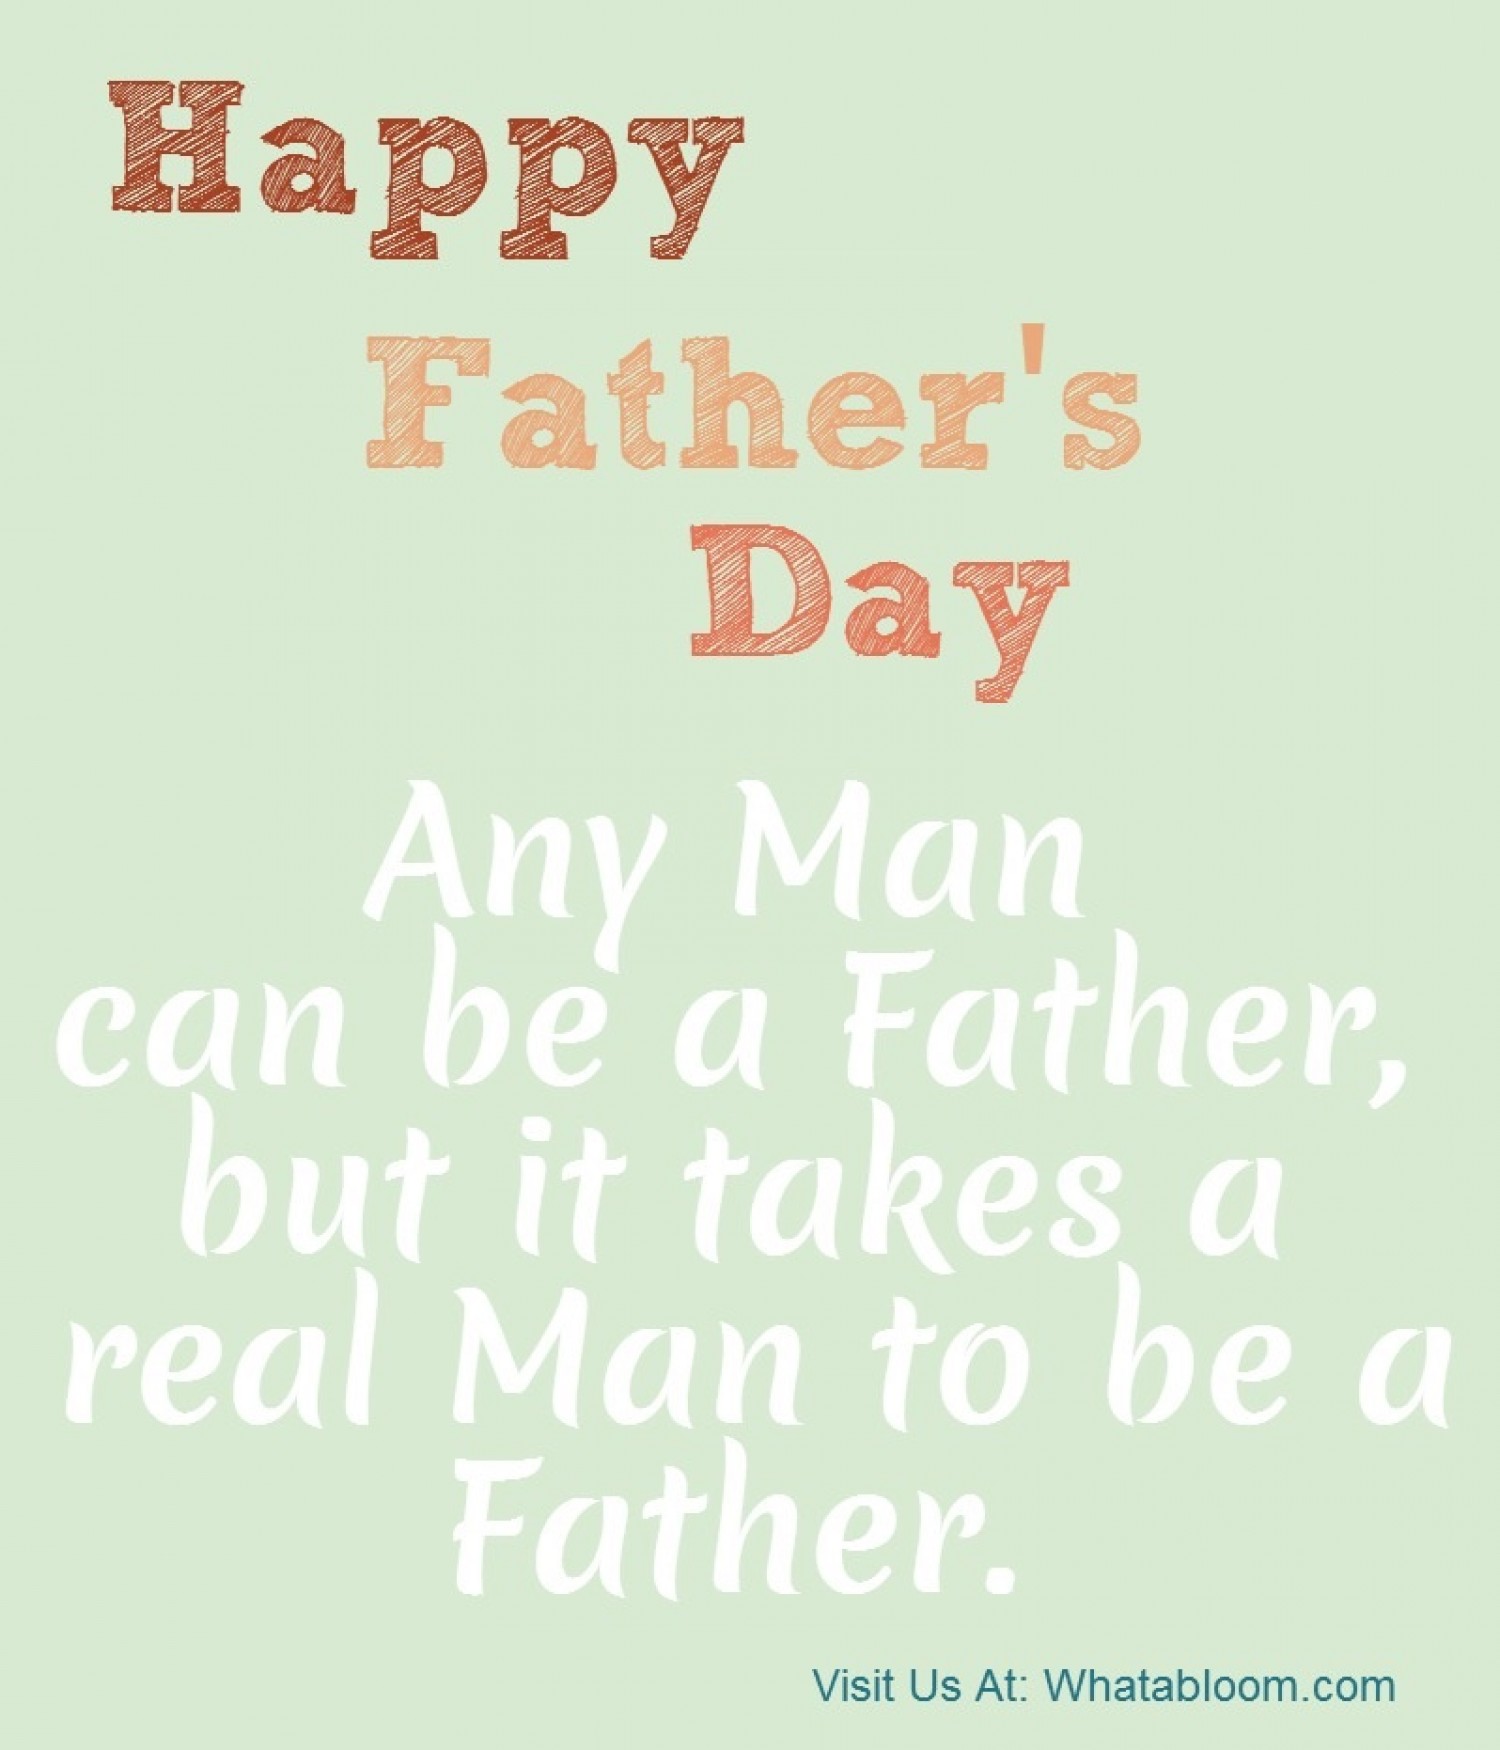 happy father’s day any man can be a father, but it takes a real man to be a father